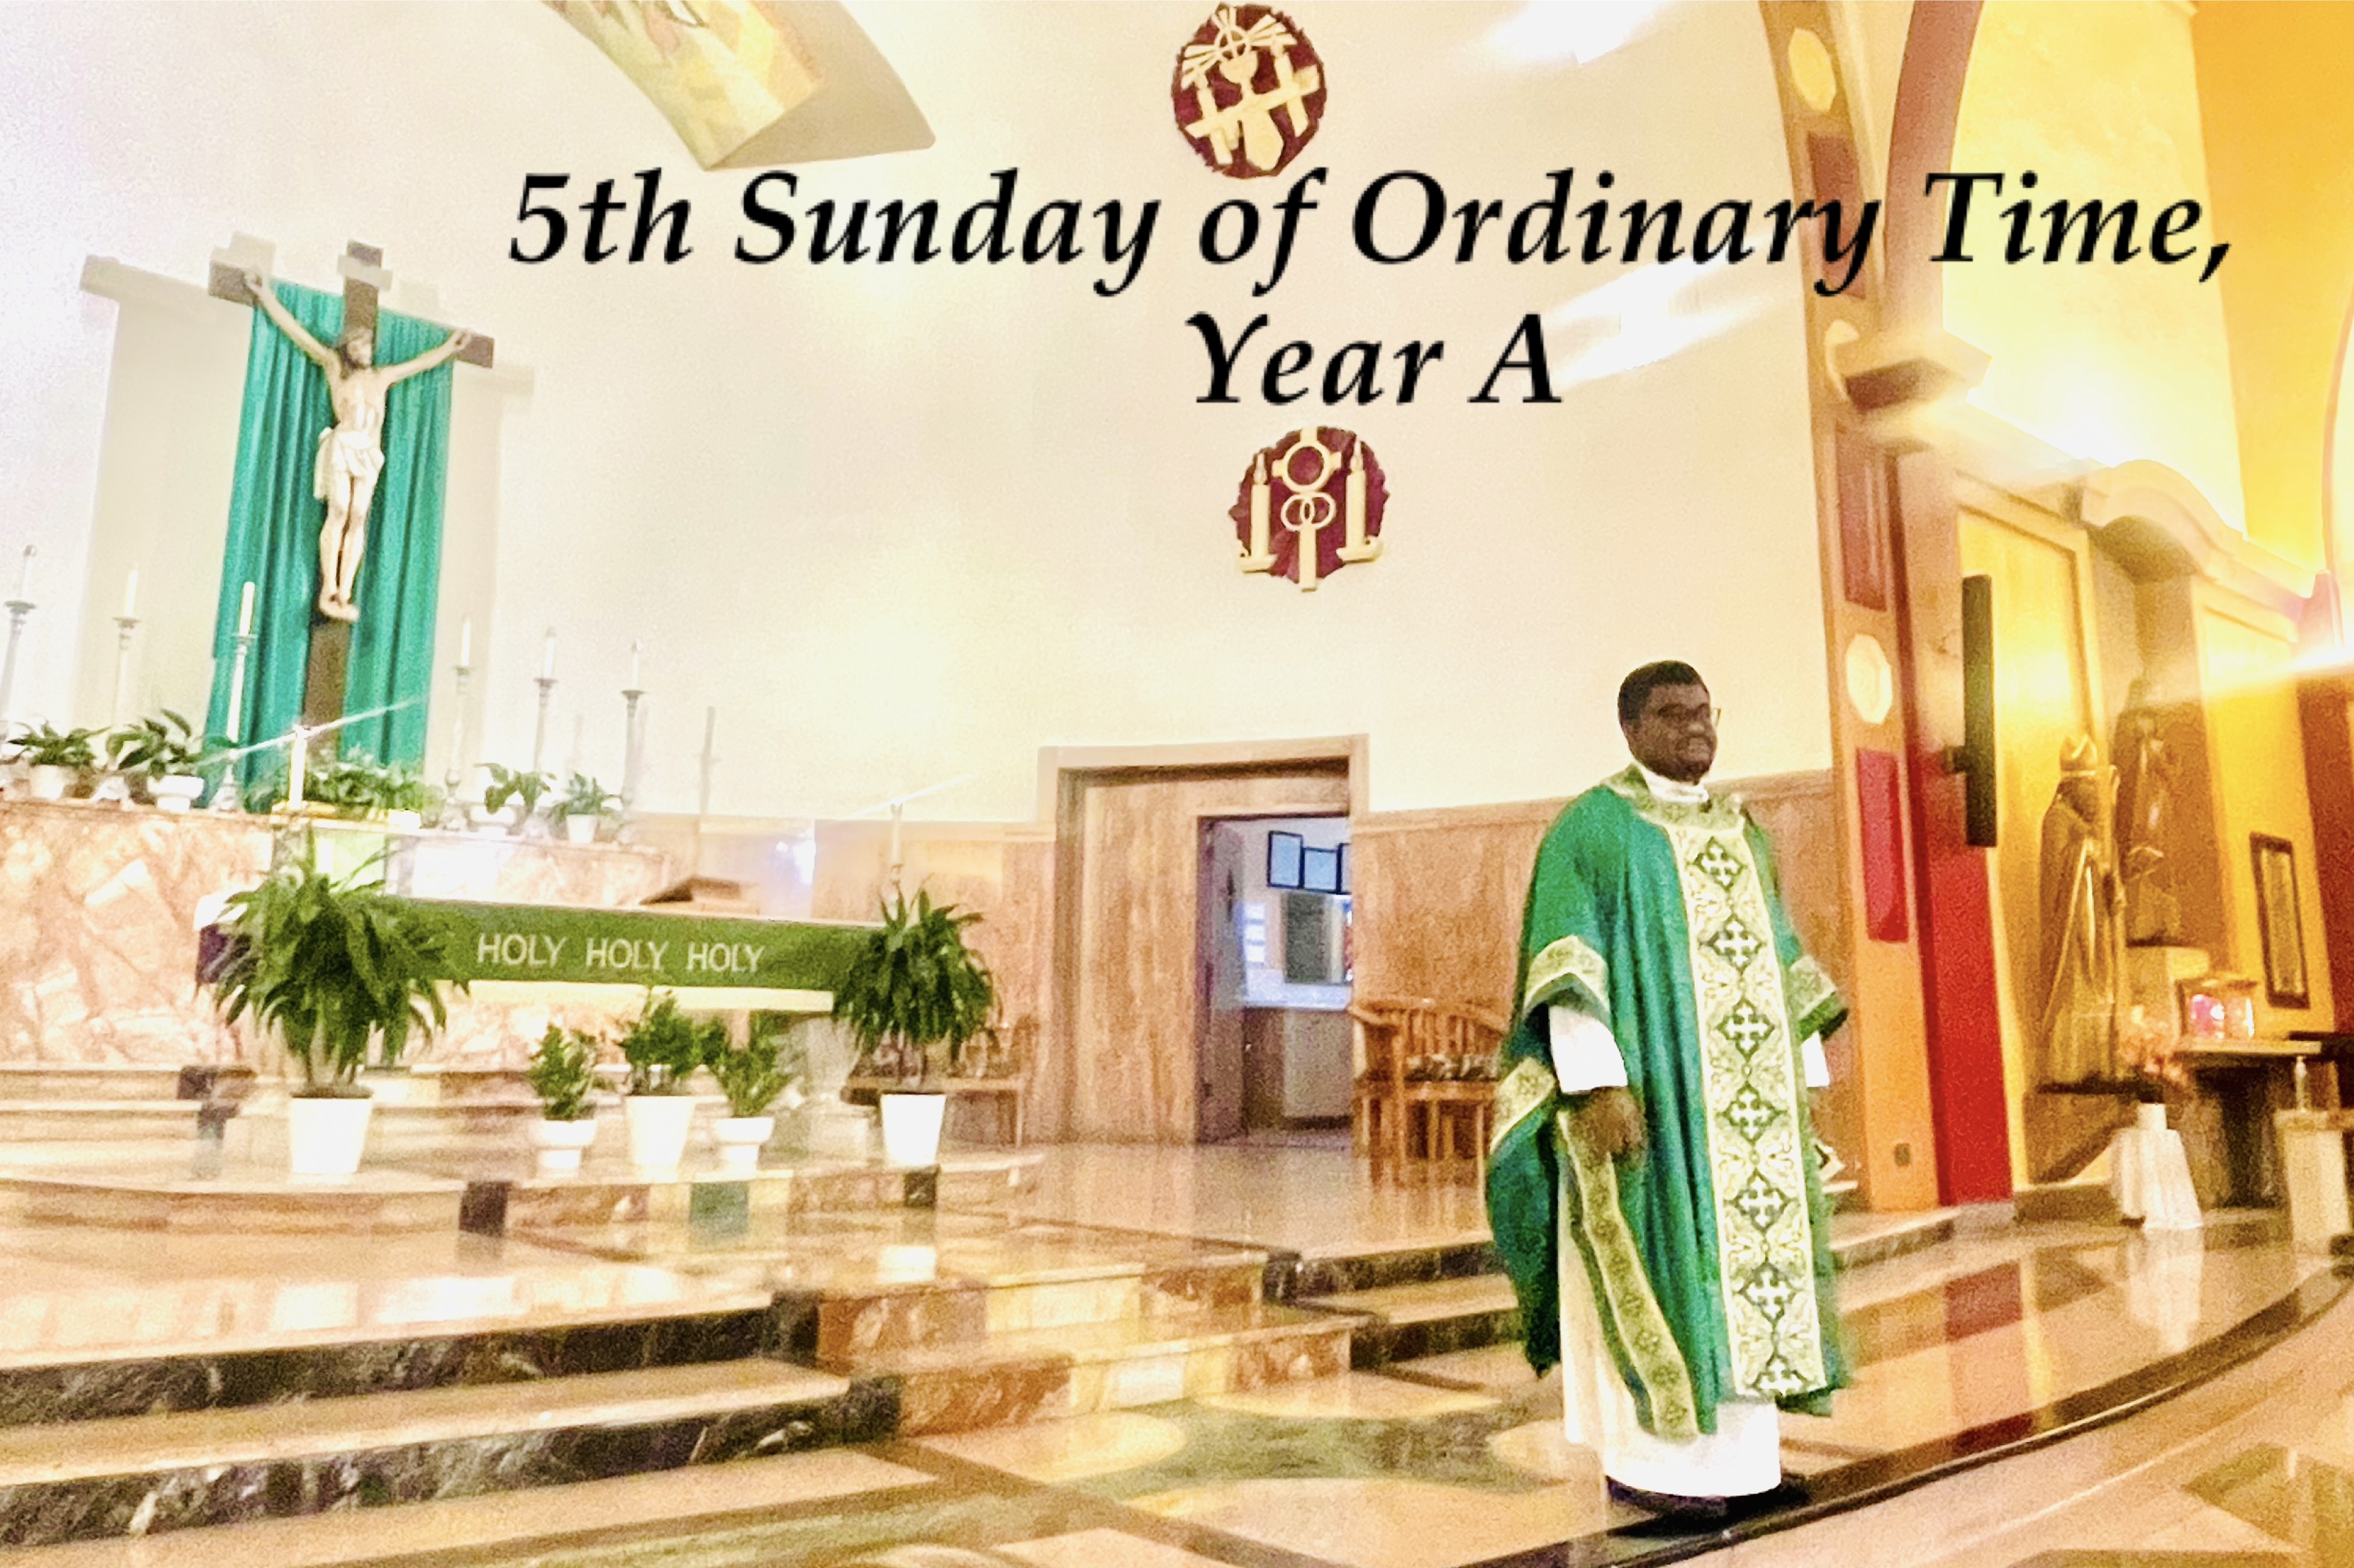 5th Sunday of Ordinary Time, Year A